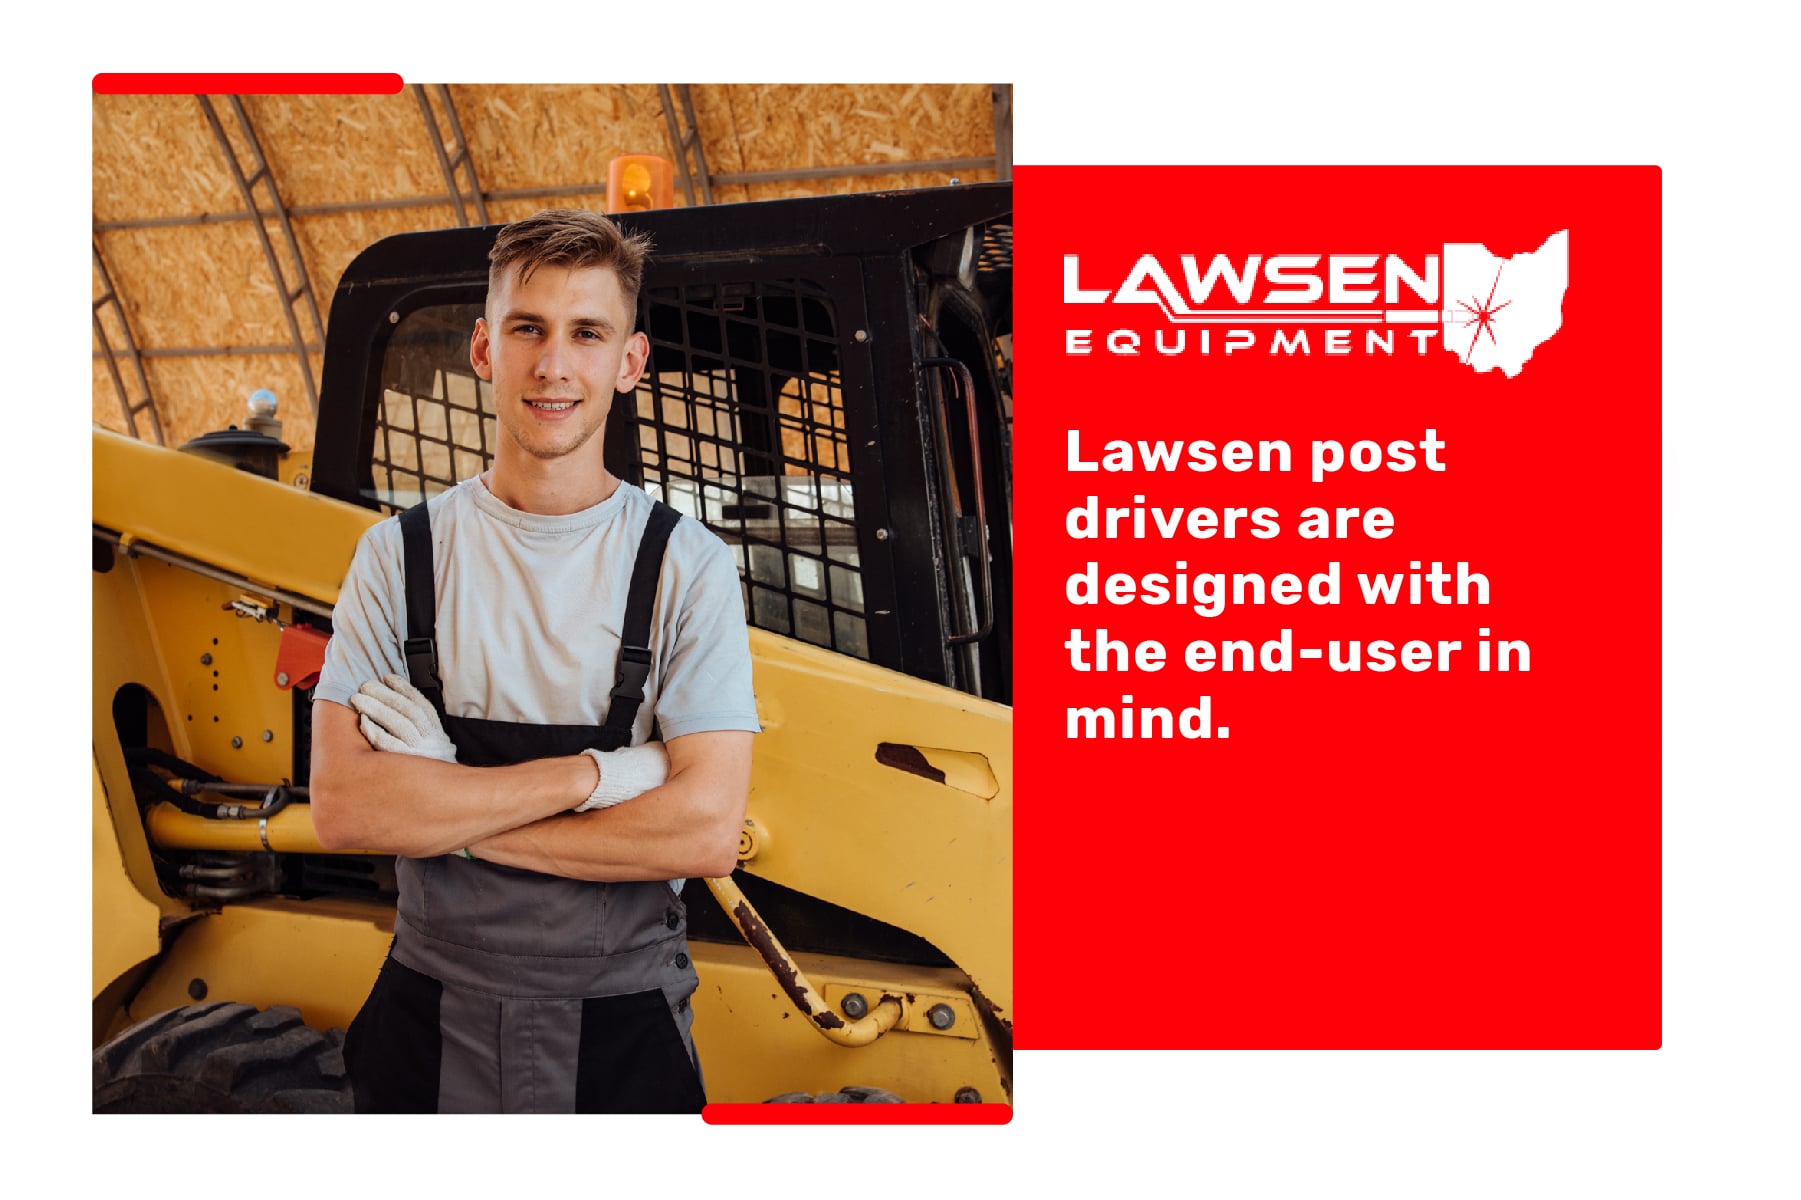 Lawsen Equipment post drivers are designed with the end user in mind